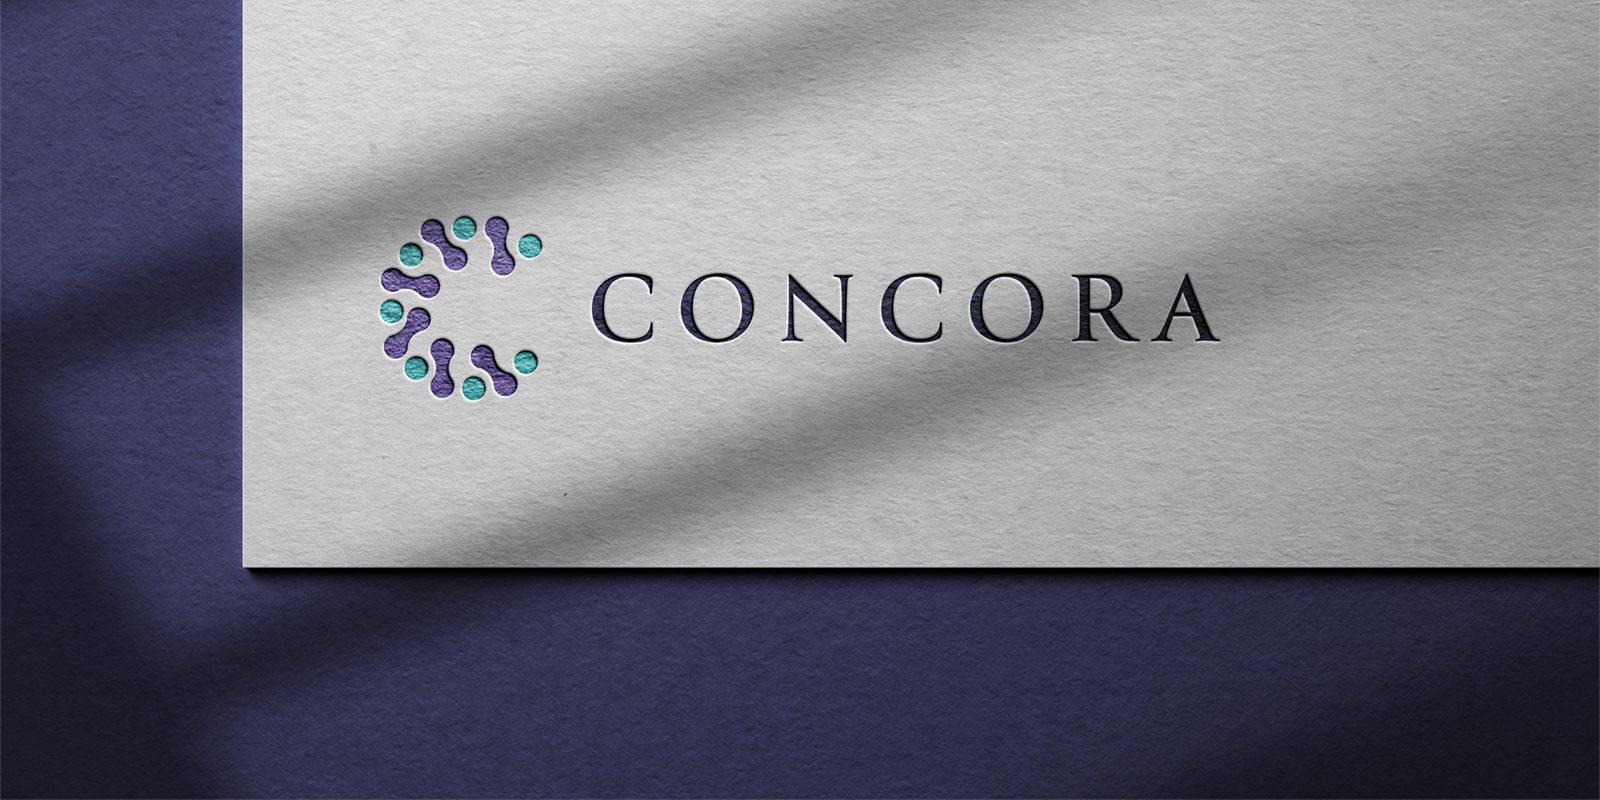 Concora Branding Project Logo Embossed On Paper Texture